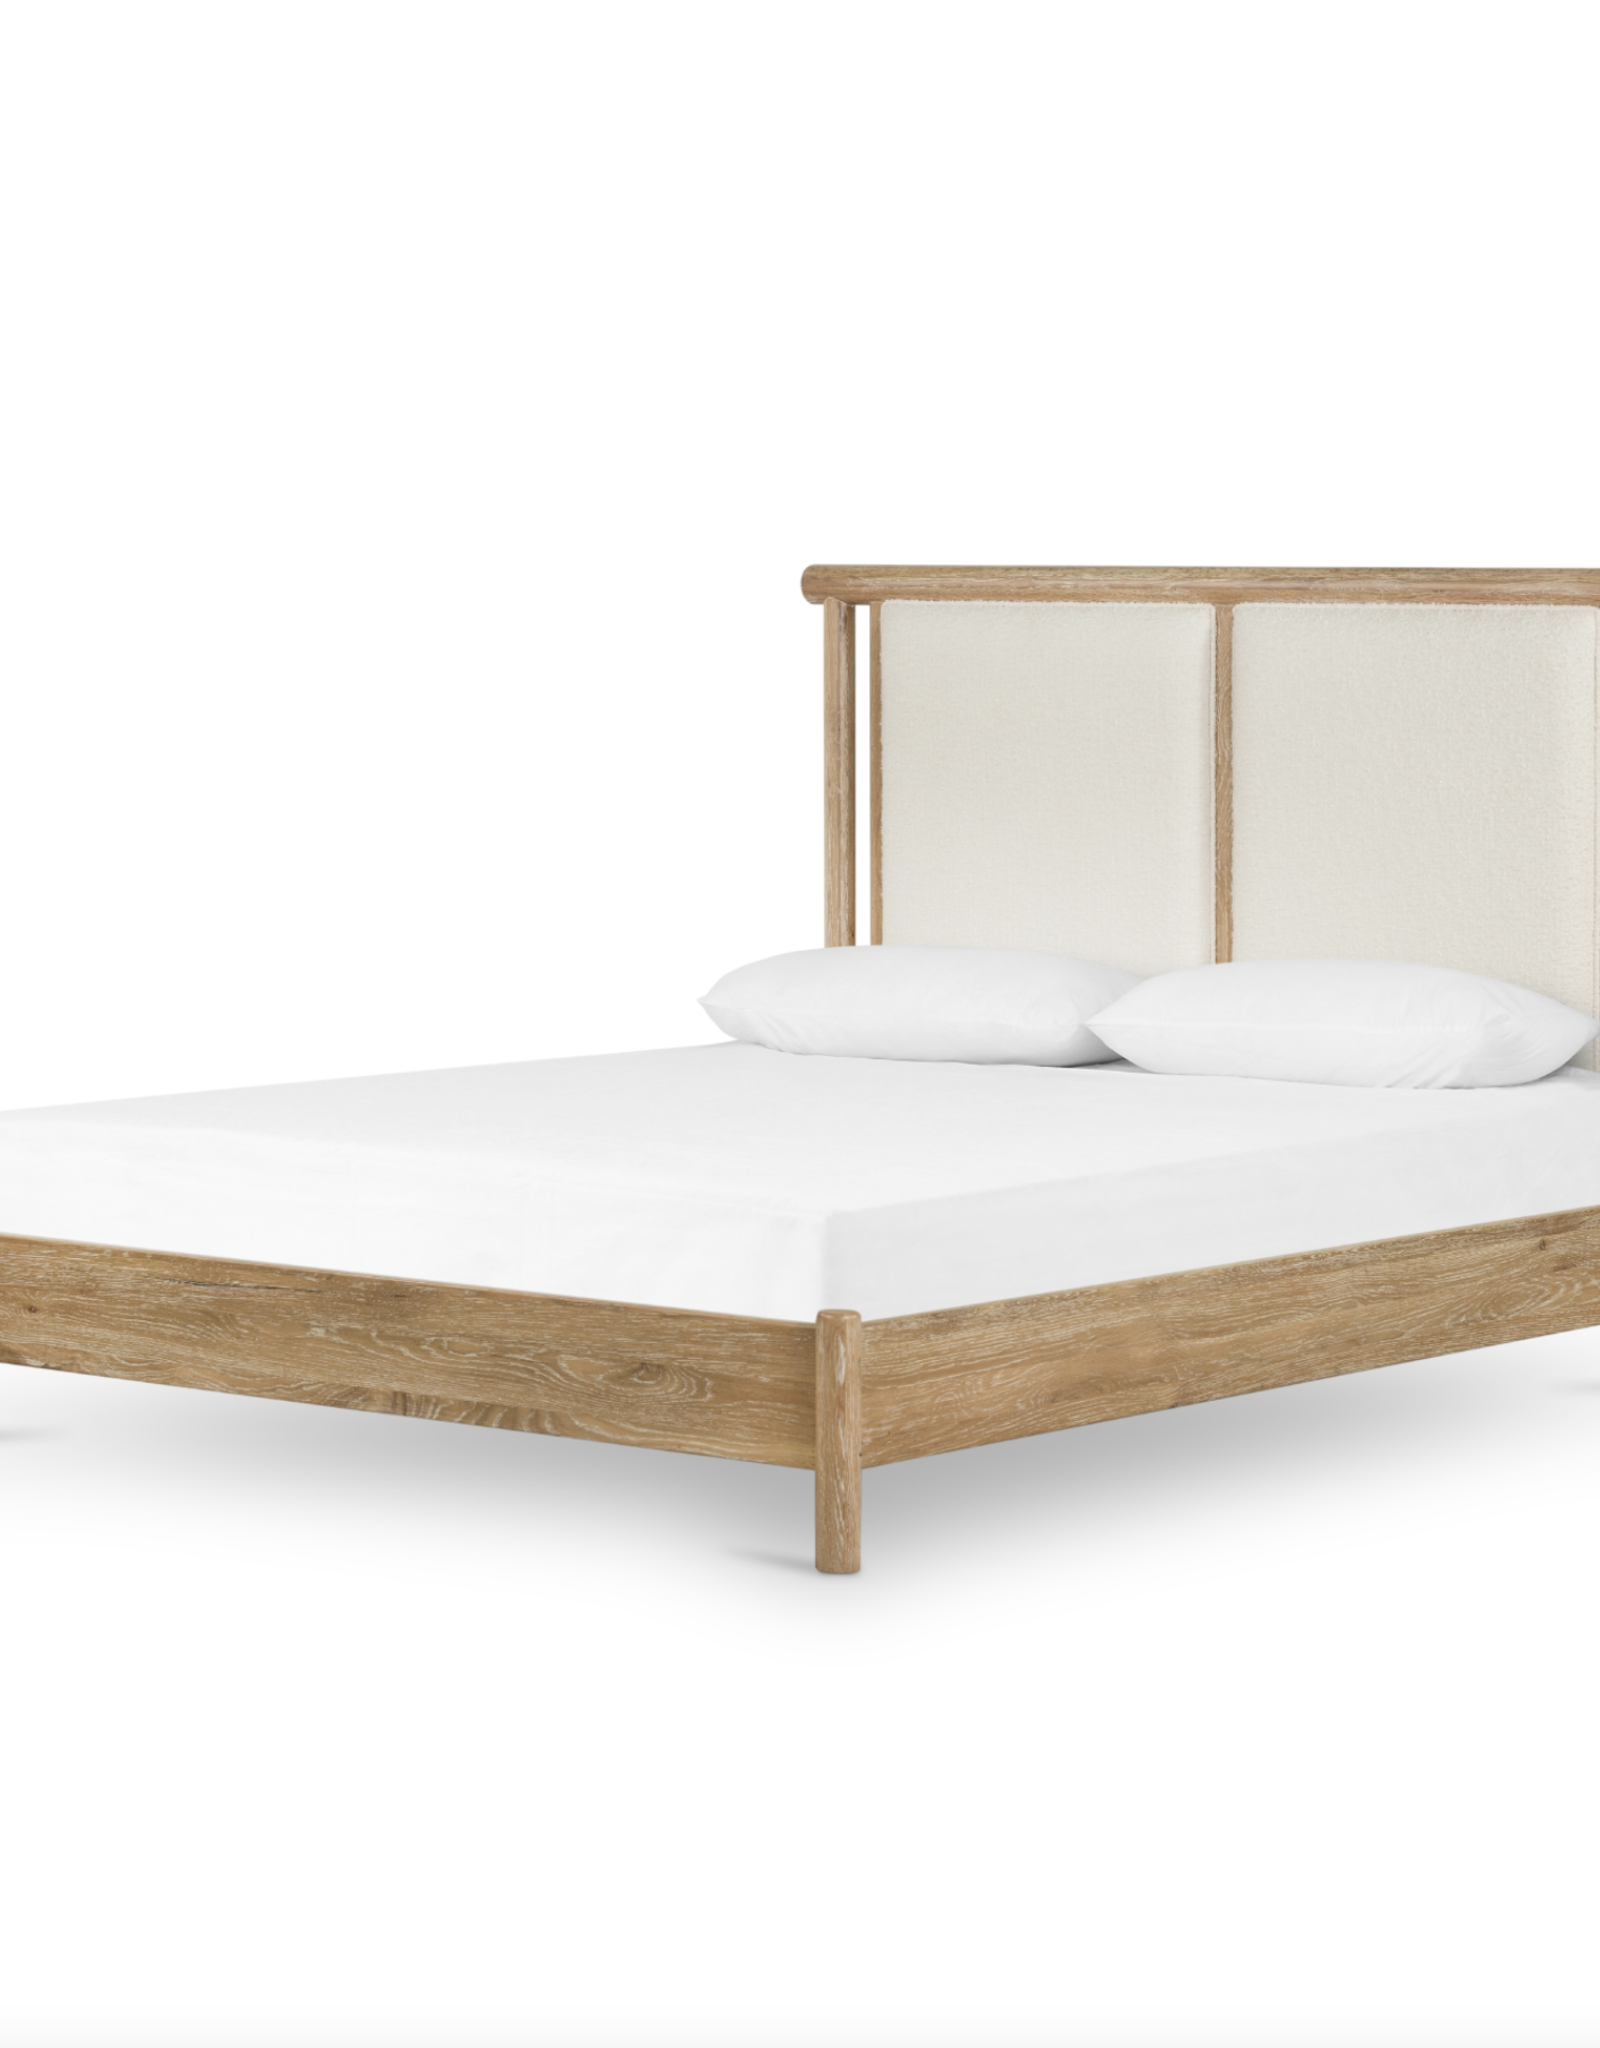 Montana Bed in Altro Snow - King